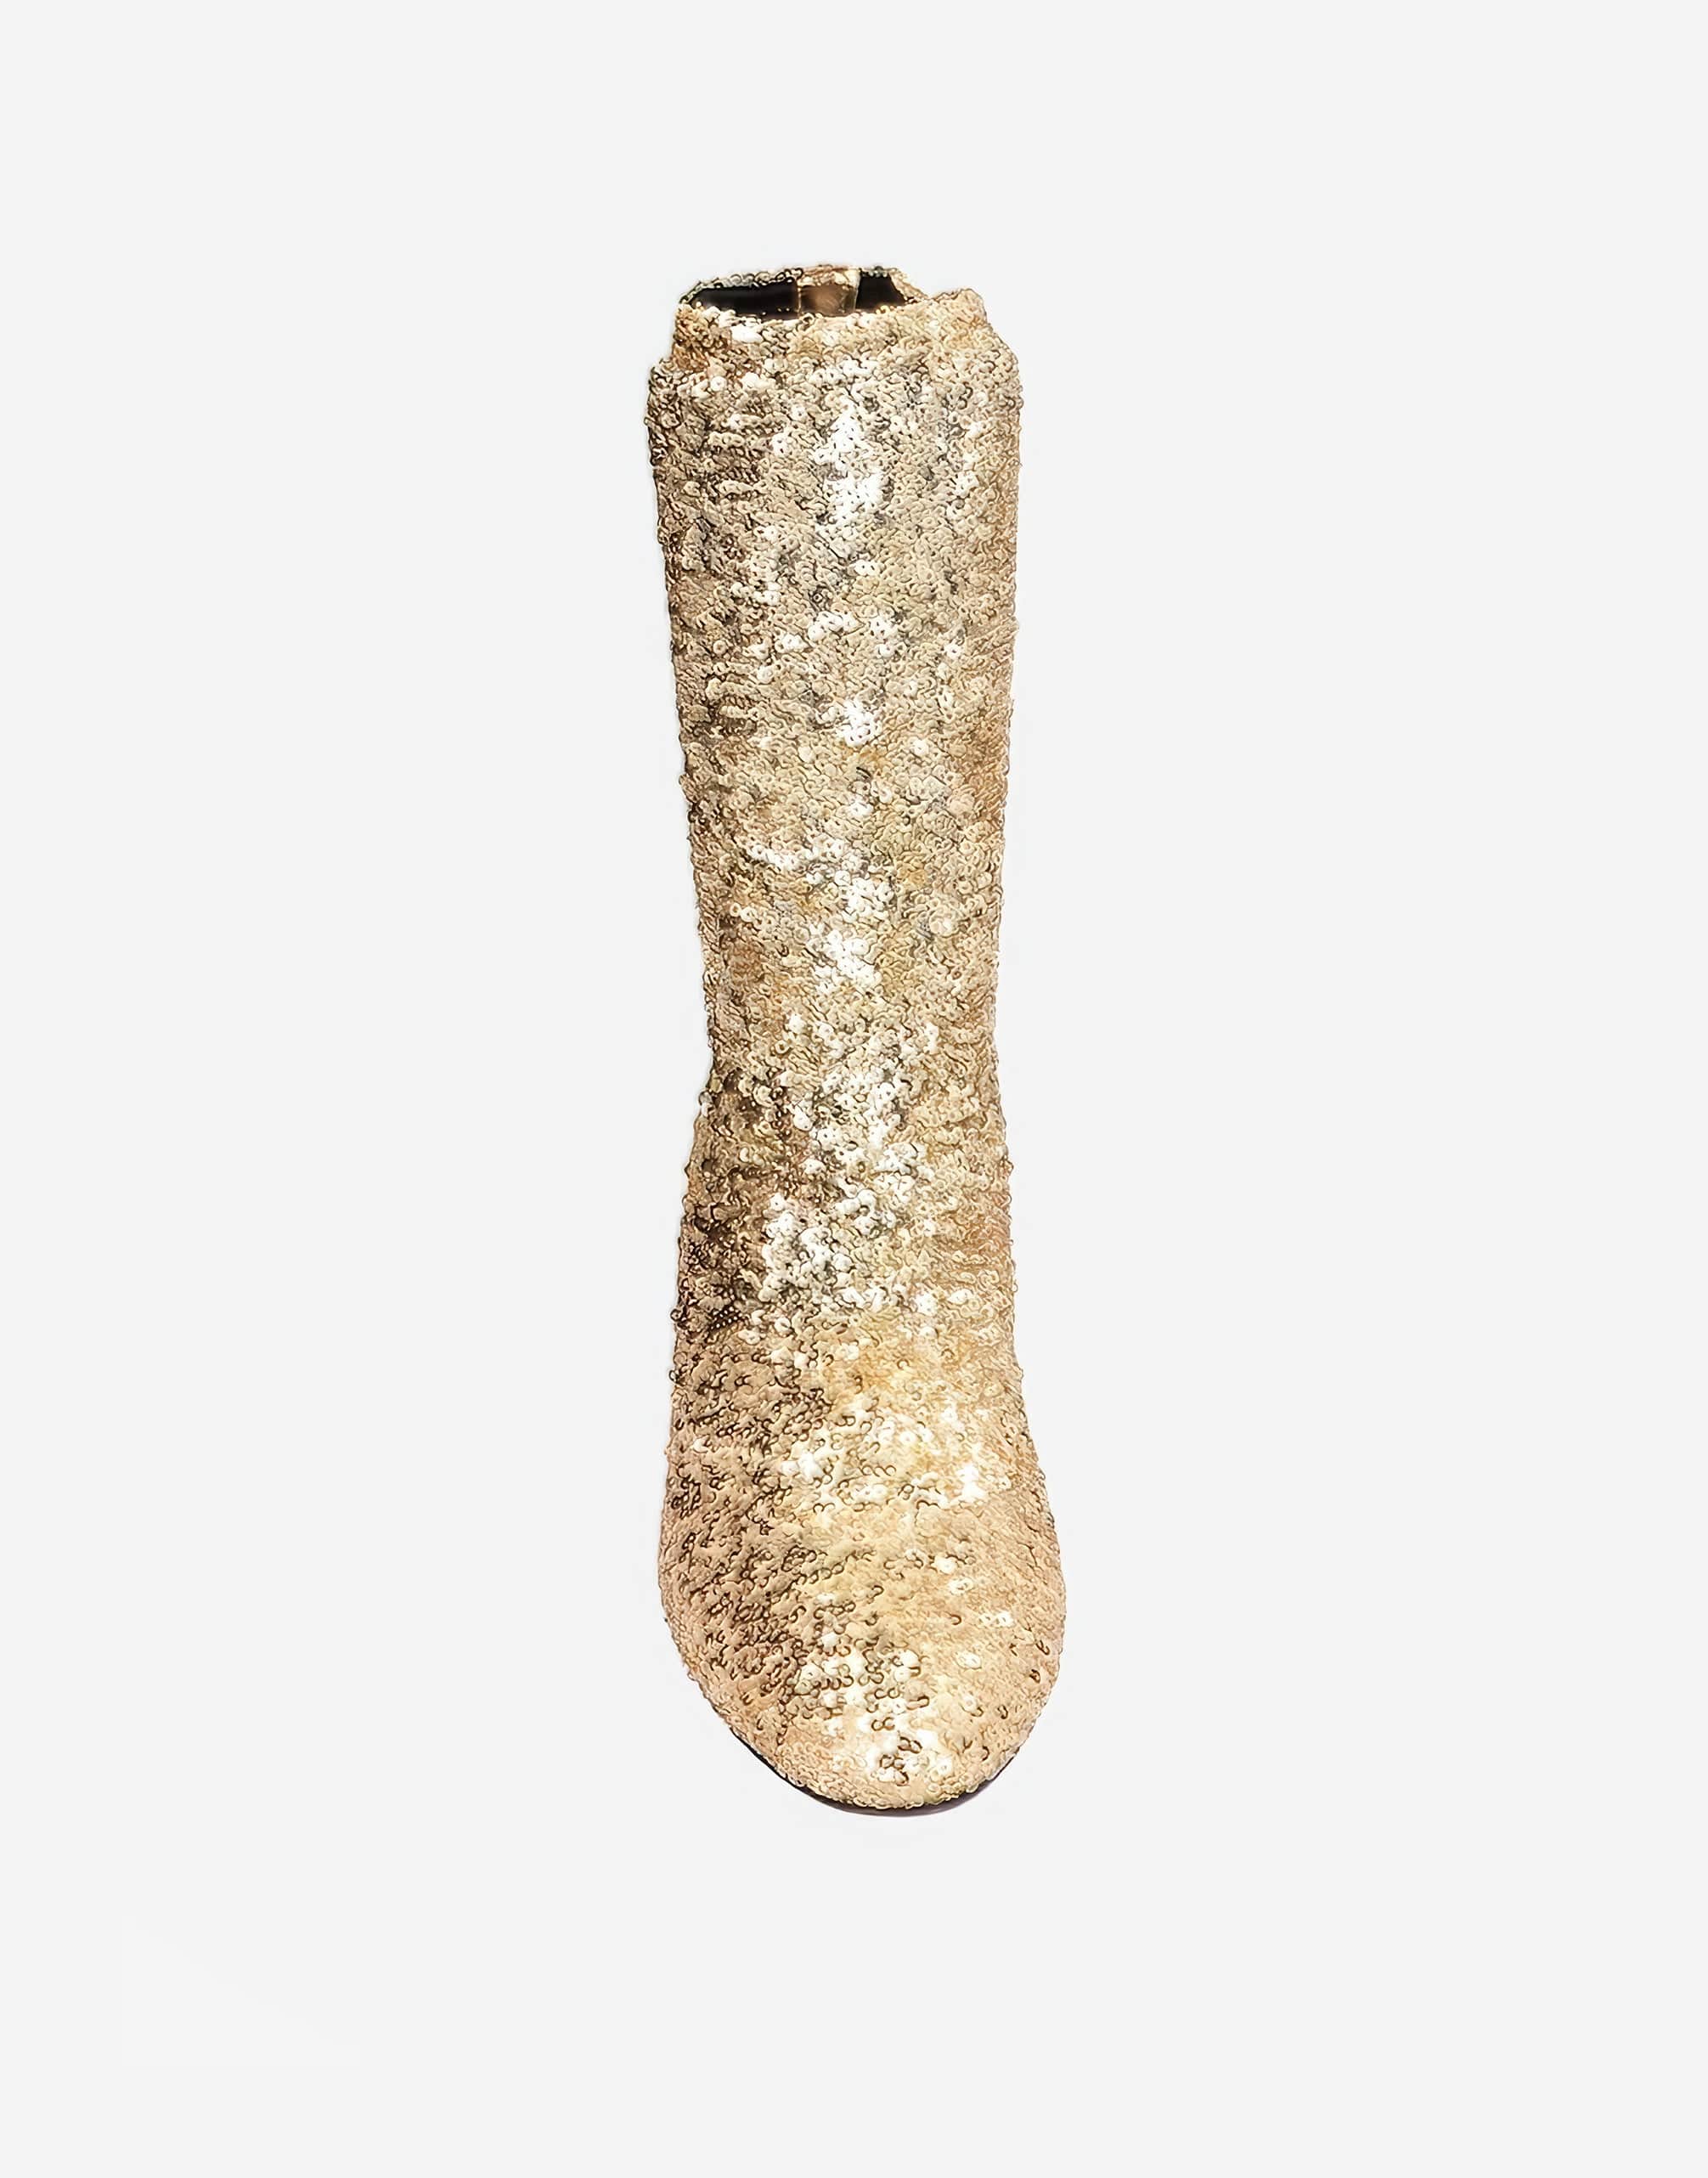 Dolce & Gabbana Sequined Gold Stretch Boots